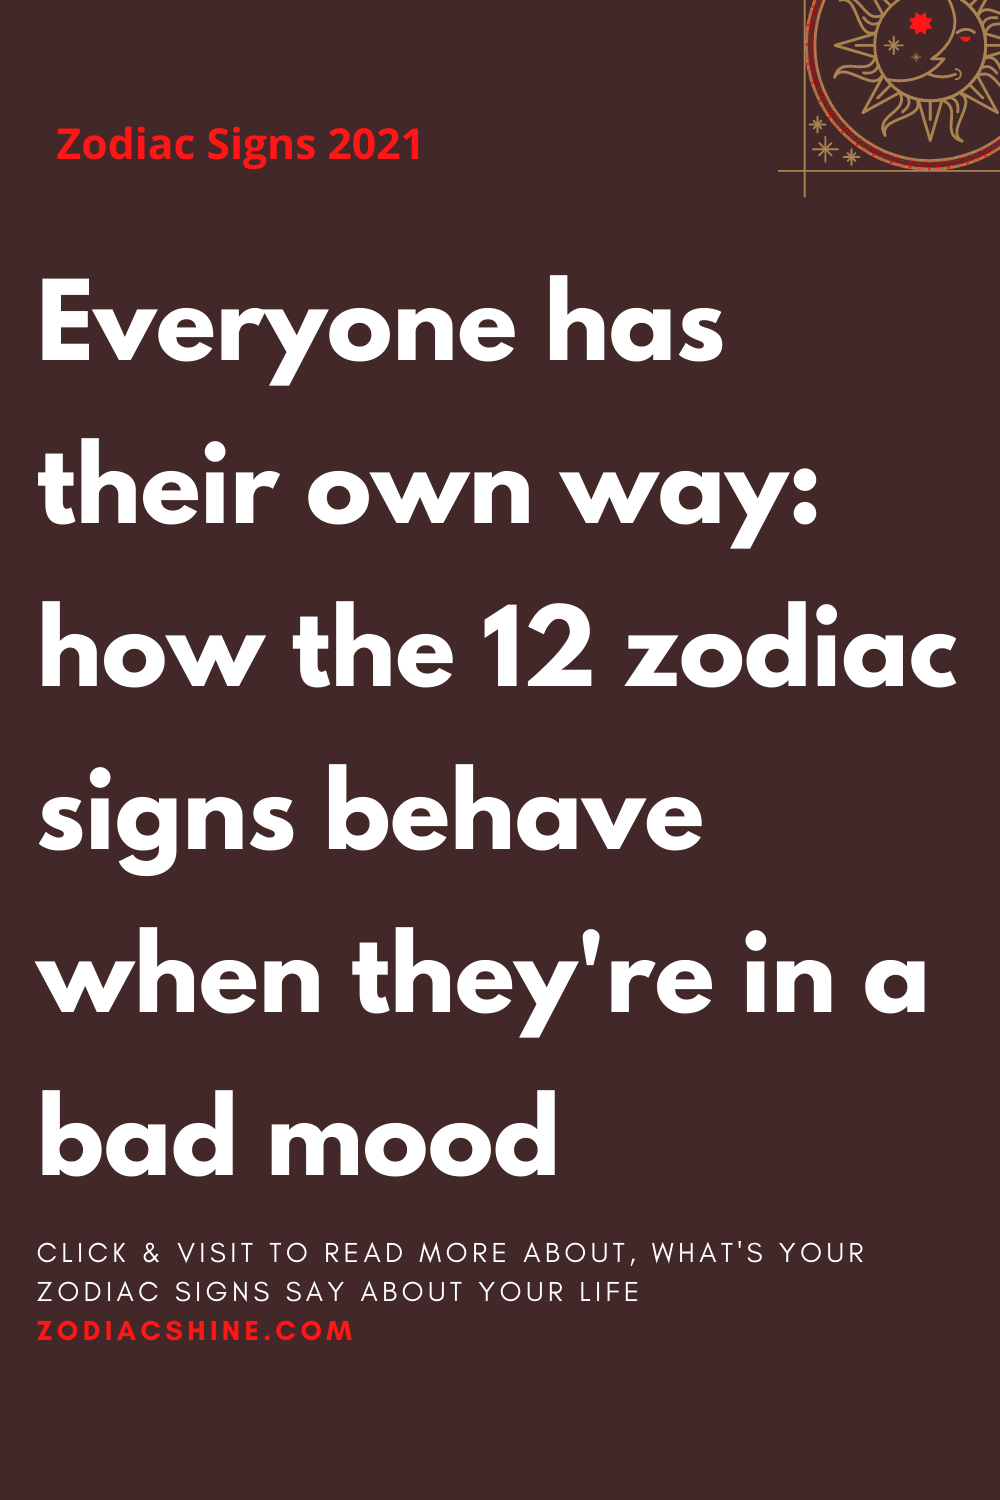 Everyone has their own way: how the 12 zodiac signs behave when they're in a bad mood